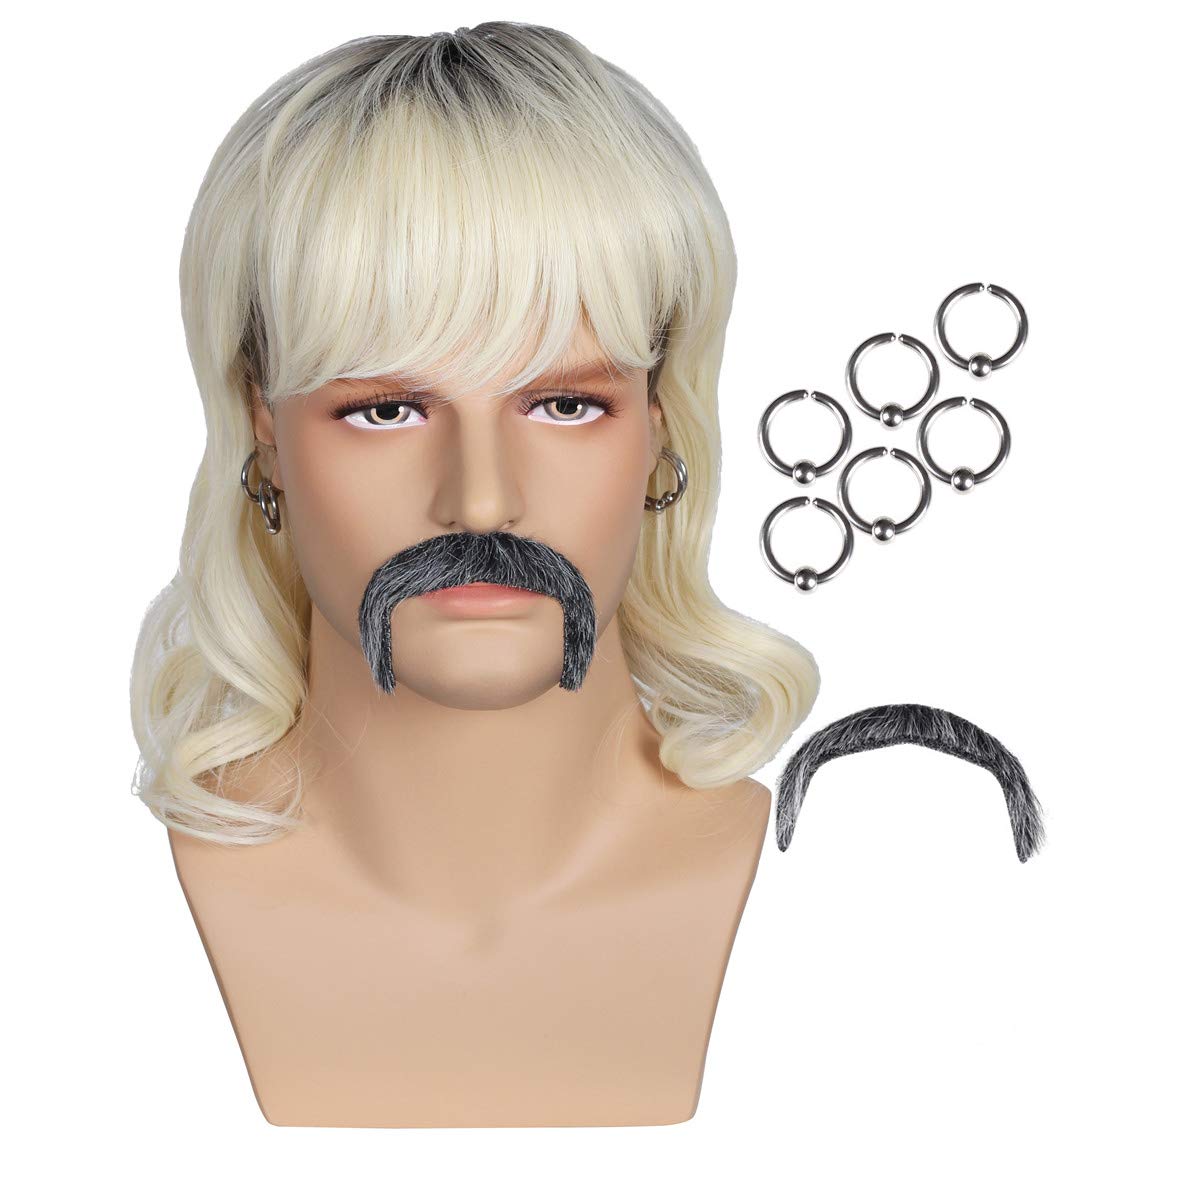 Price:$19.99    Dark Root Wig with 6 Earrings and Mustache for Men  Beauty